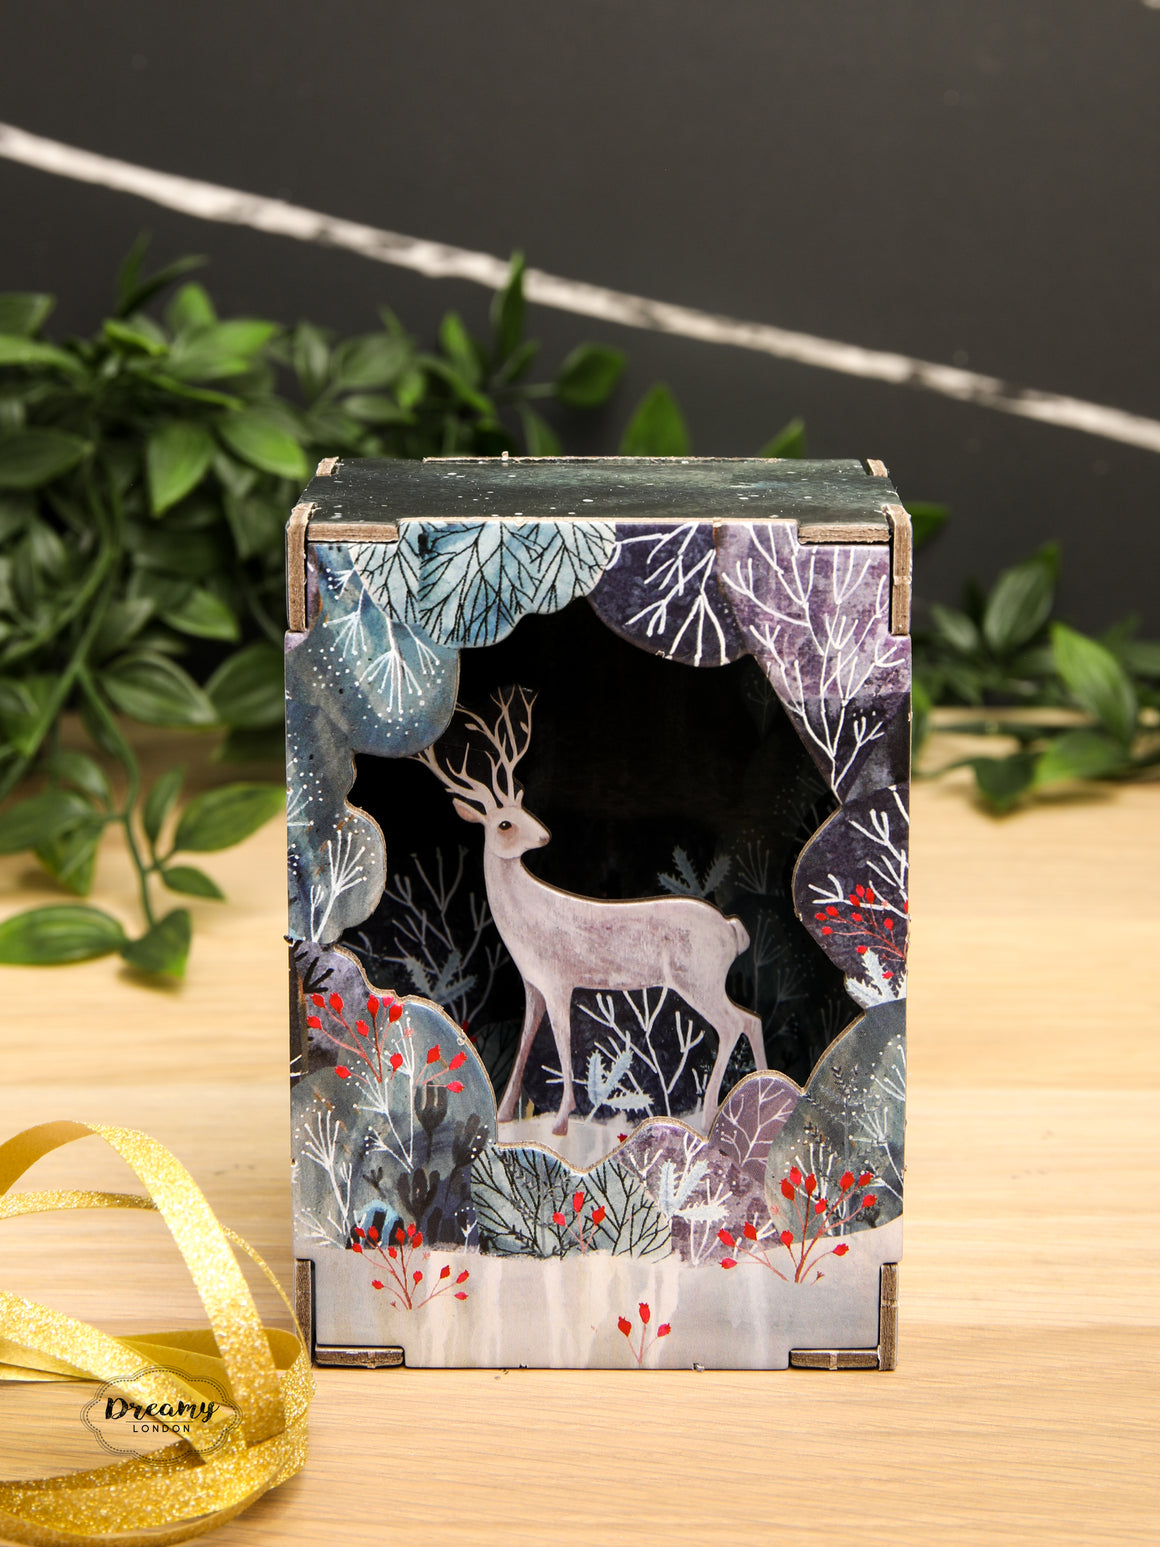 Silver Stag Pop & Slot 3D Diorama